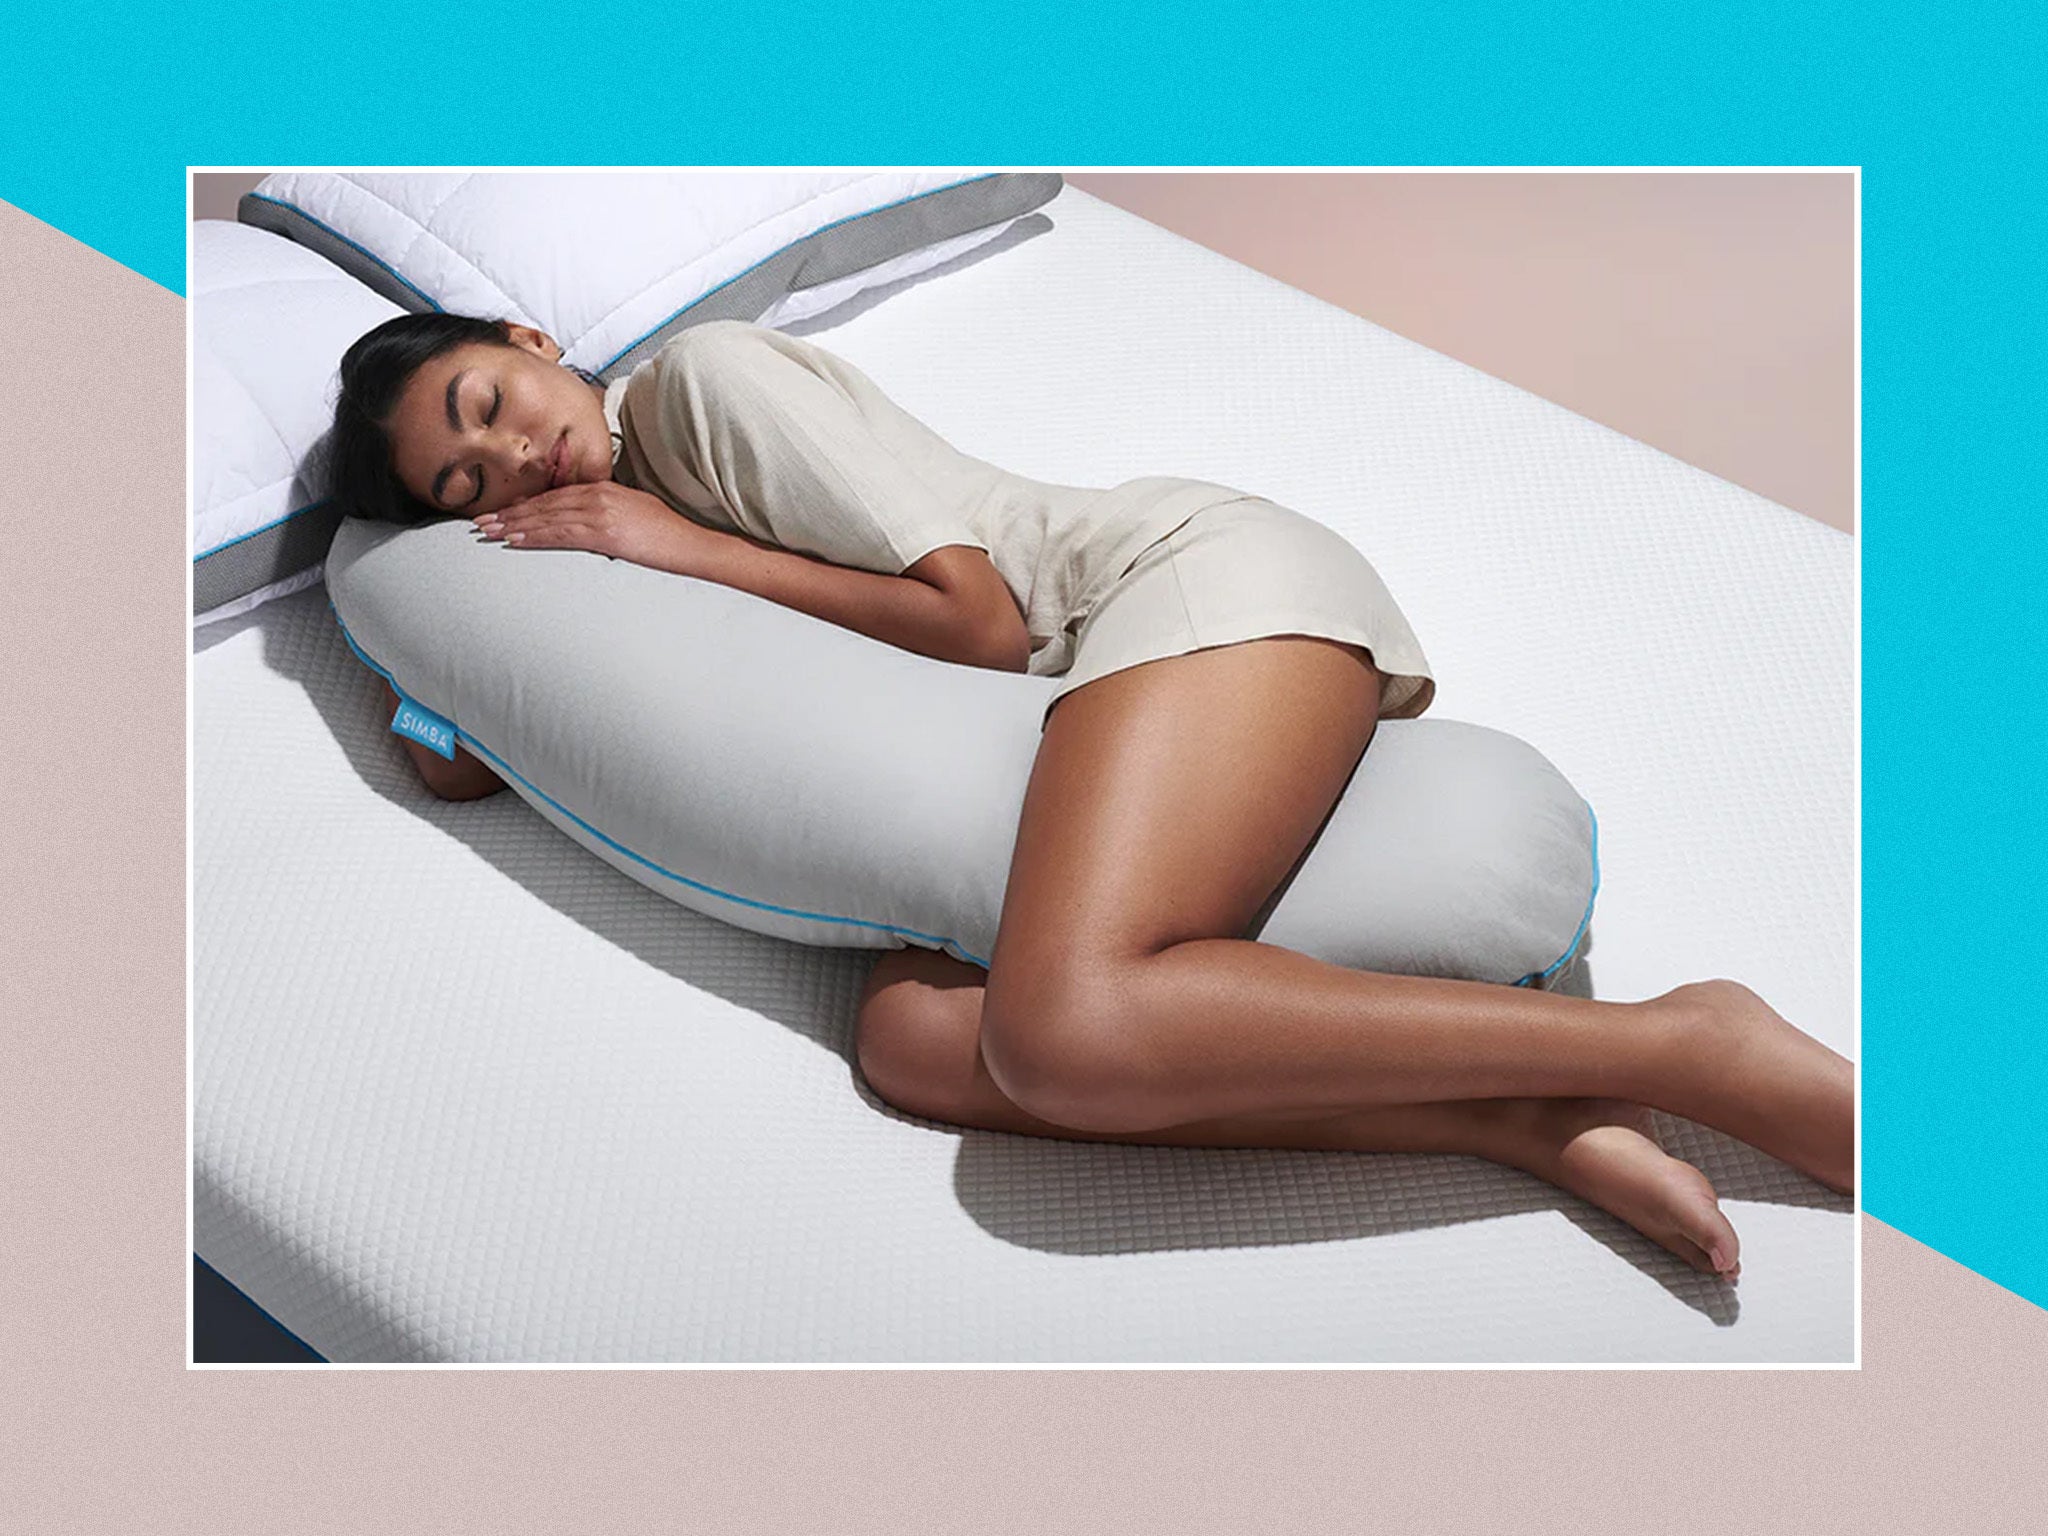 Attention, side-sleepers: we may have found the pillow for you